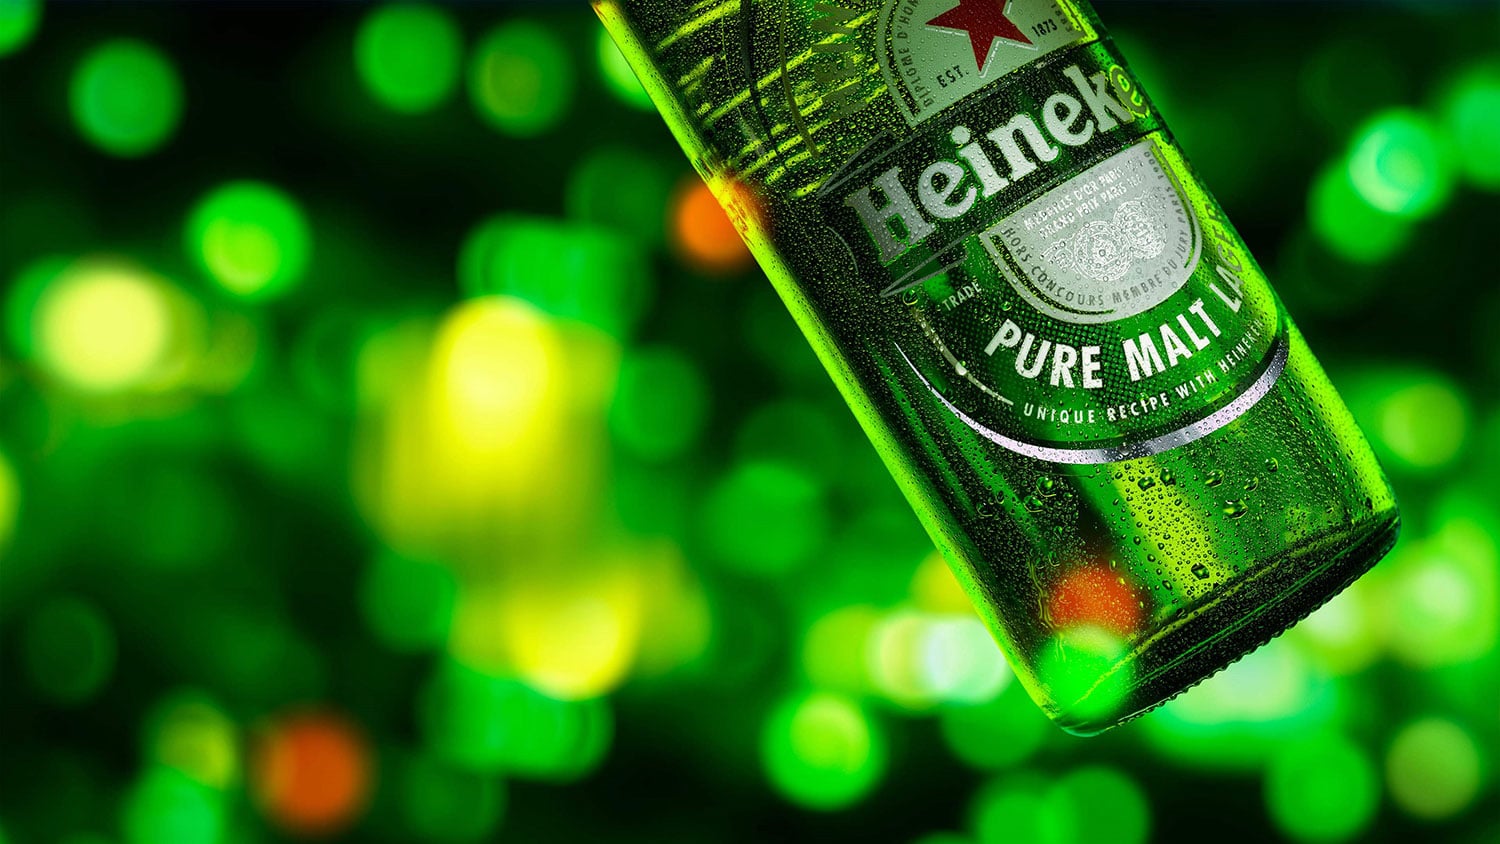 HEINEKEN is turning beer wasted due to pandemic into green energy.